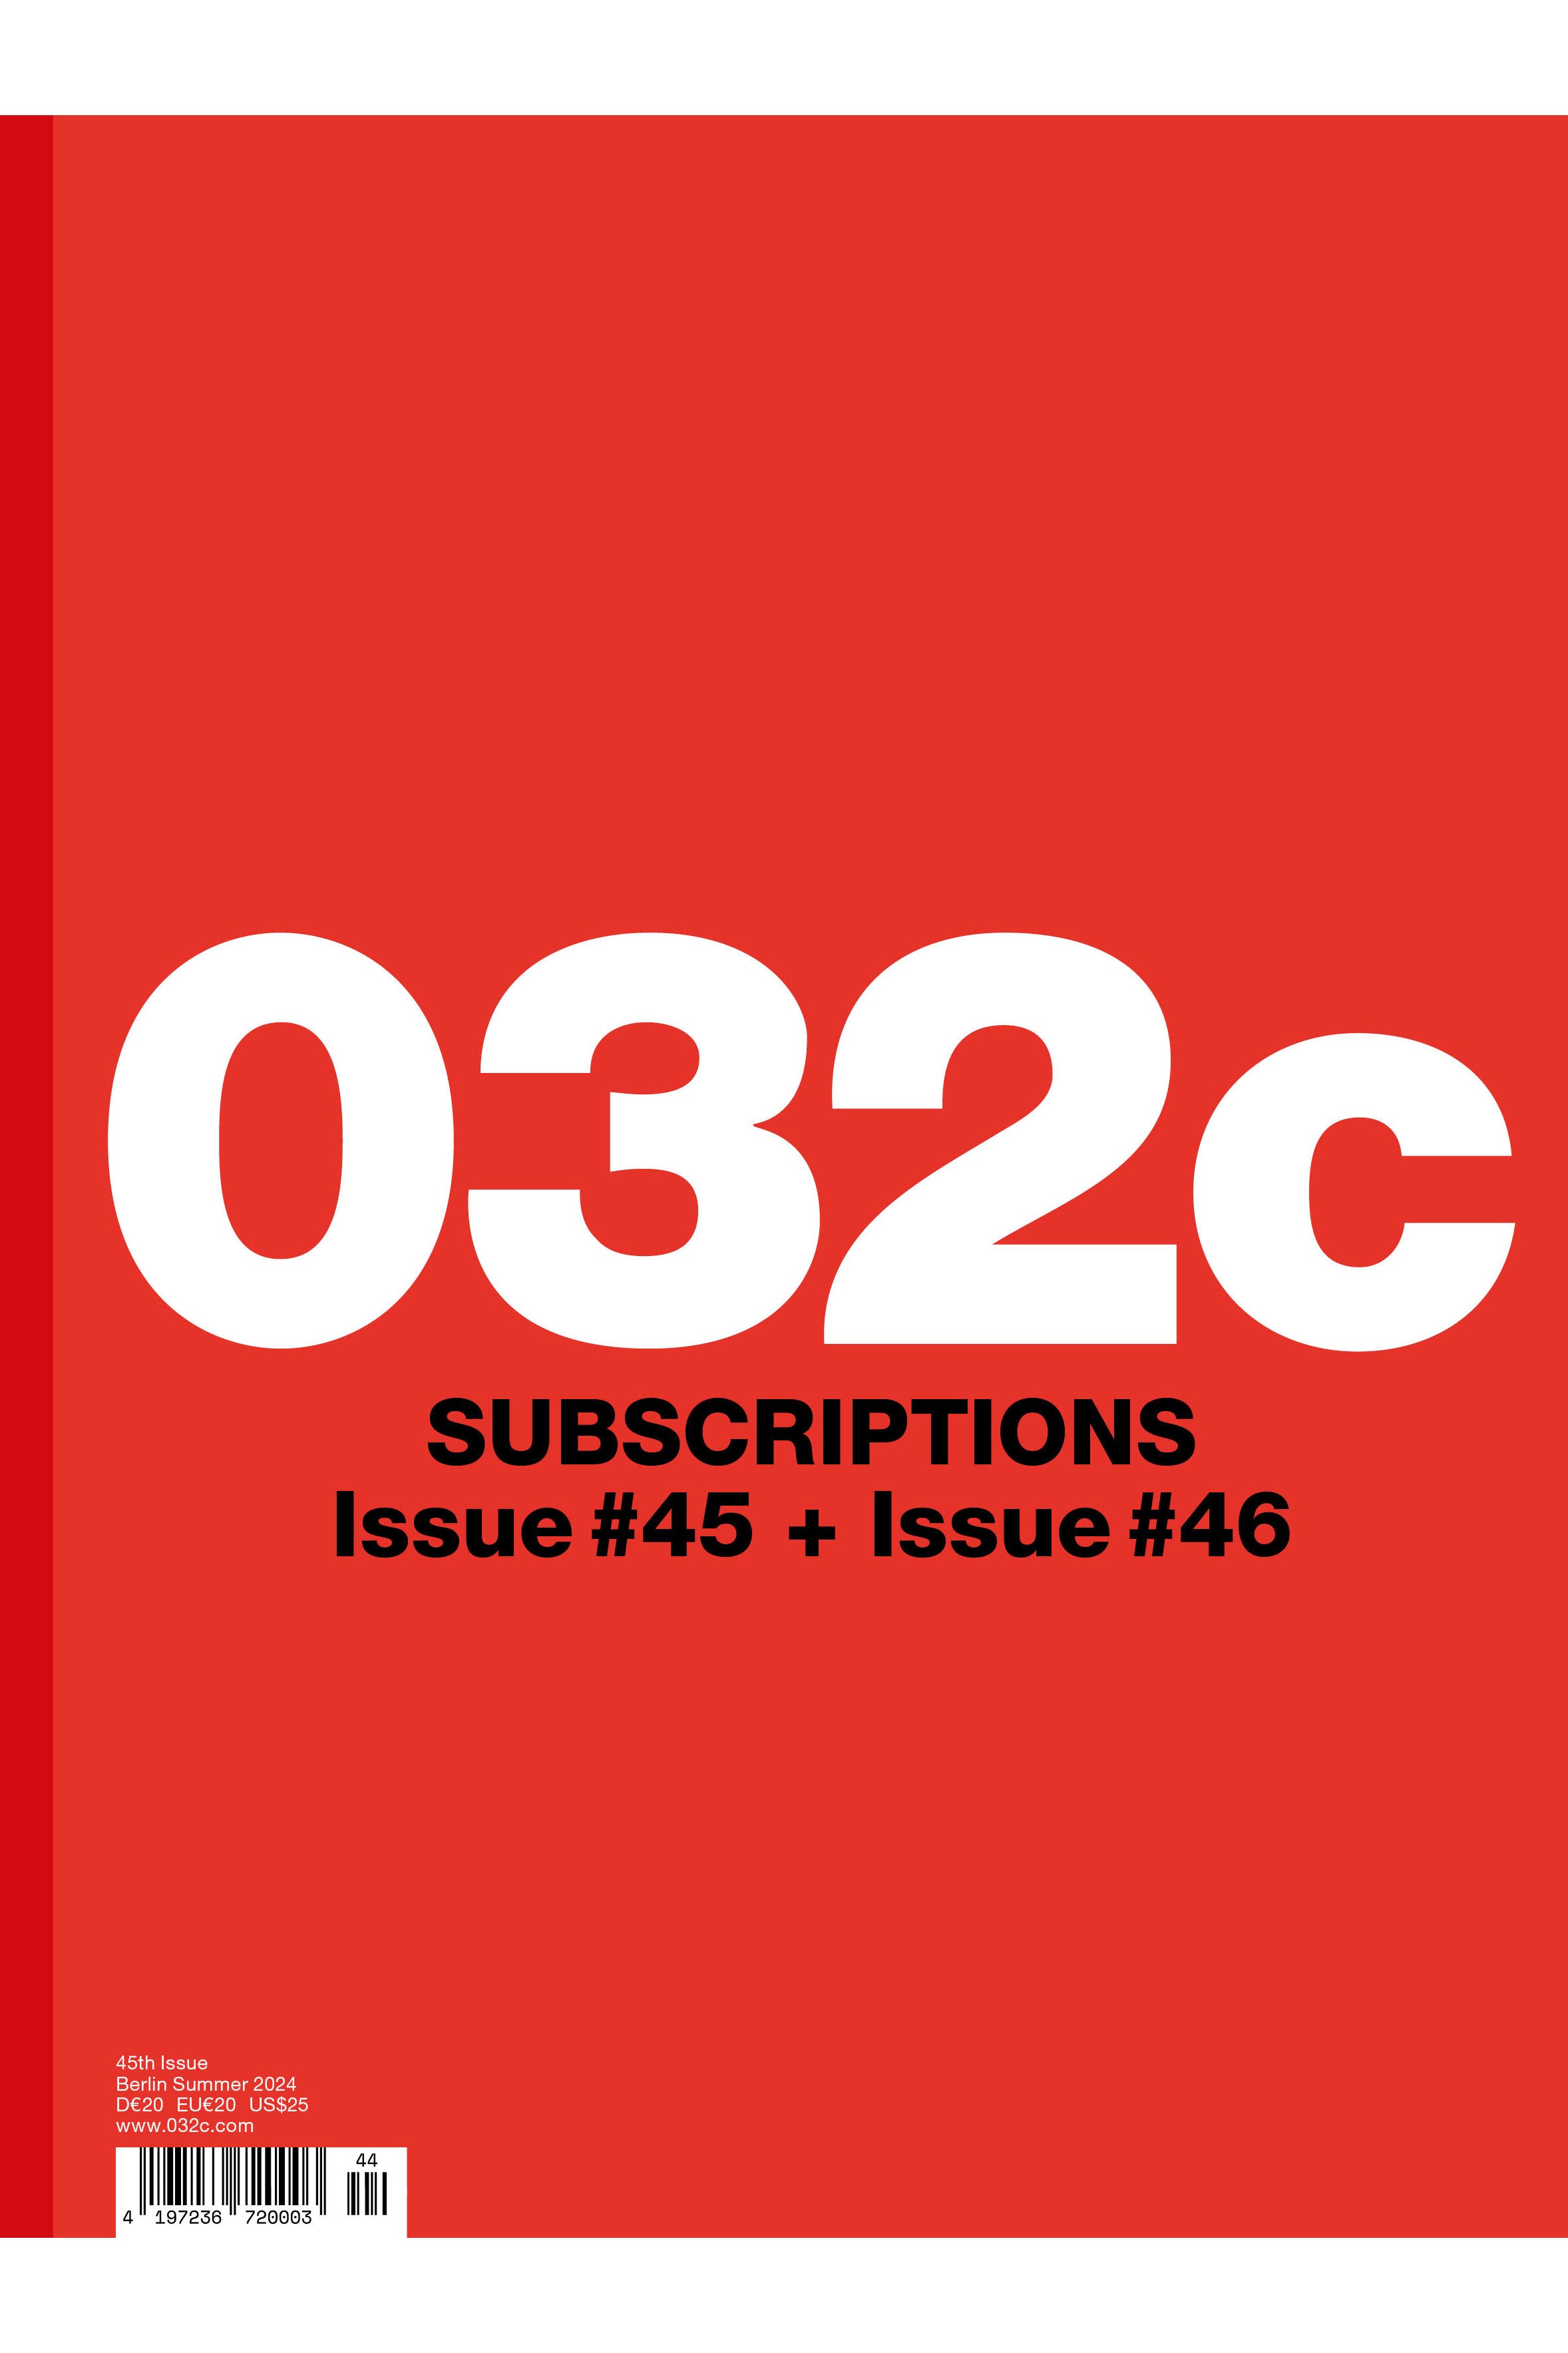 One Year Subscription (Issues 45 & 46)